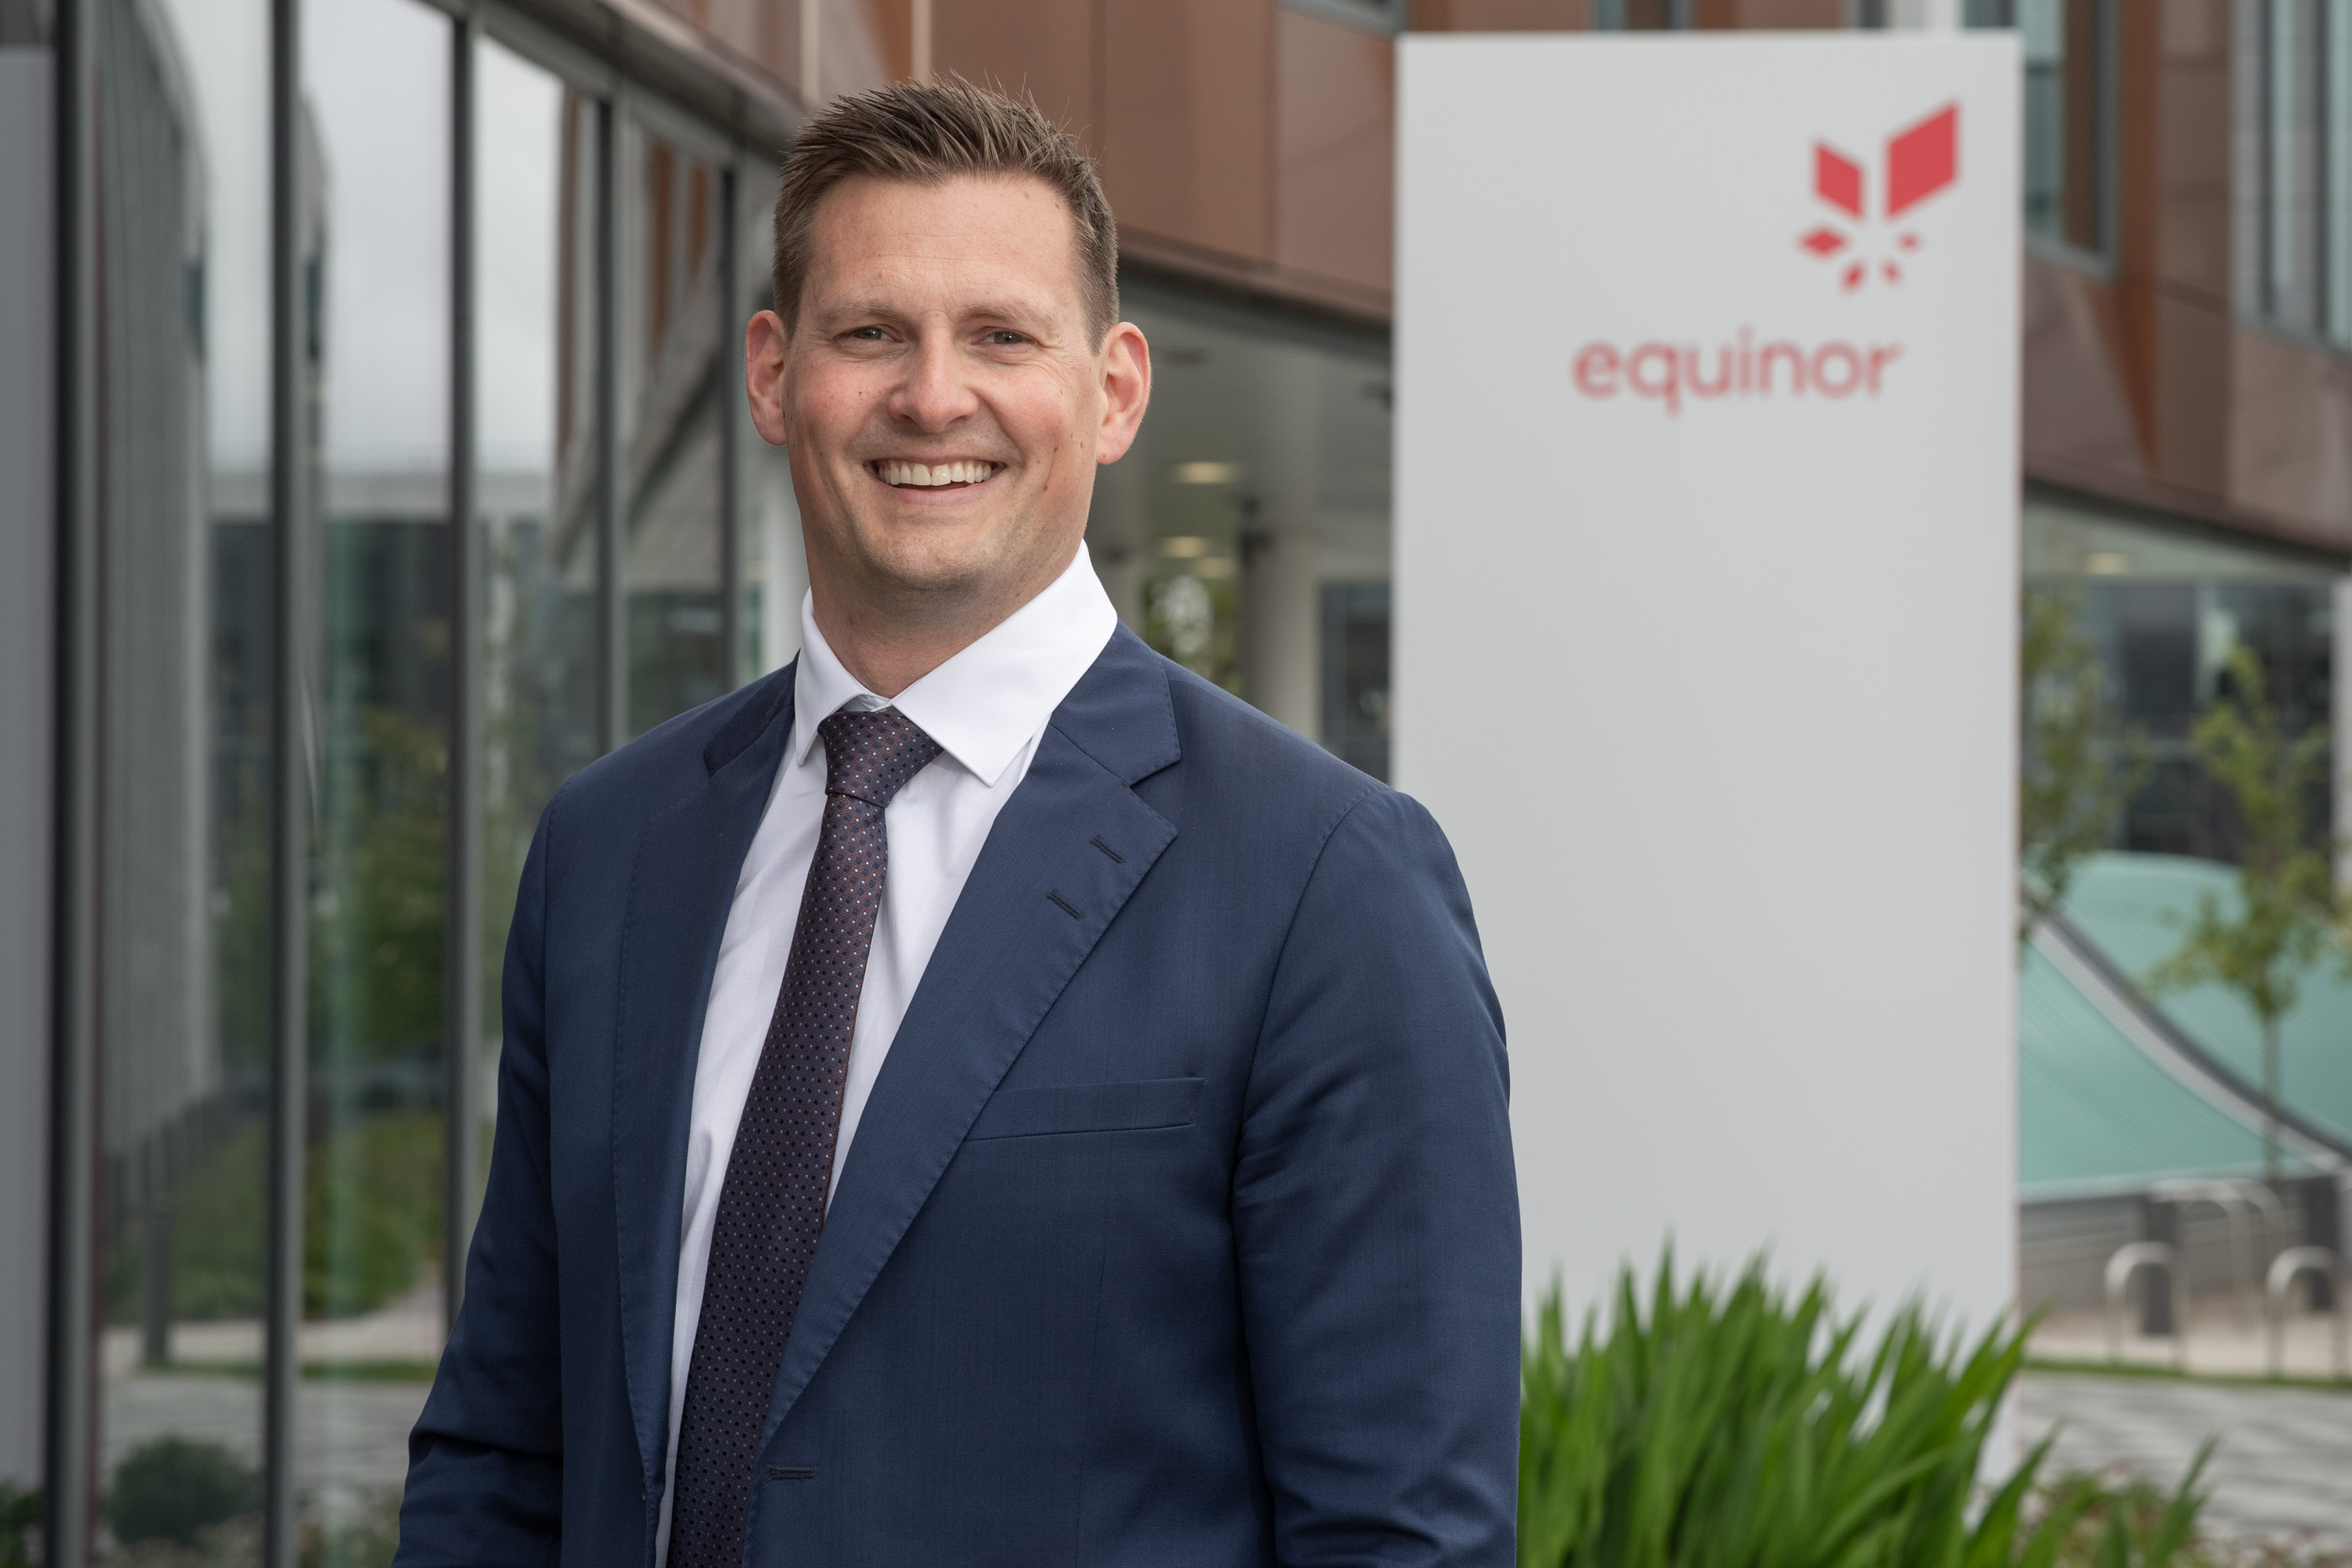 Arne Gurtner, senior vice president for UK and Ireland Offshore at Equinor.
Picture by Abermedia.